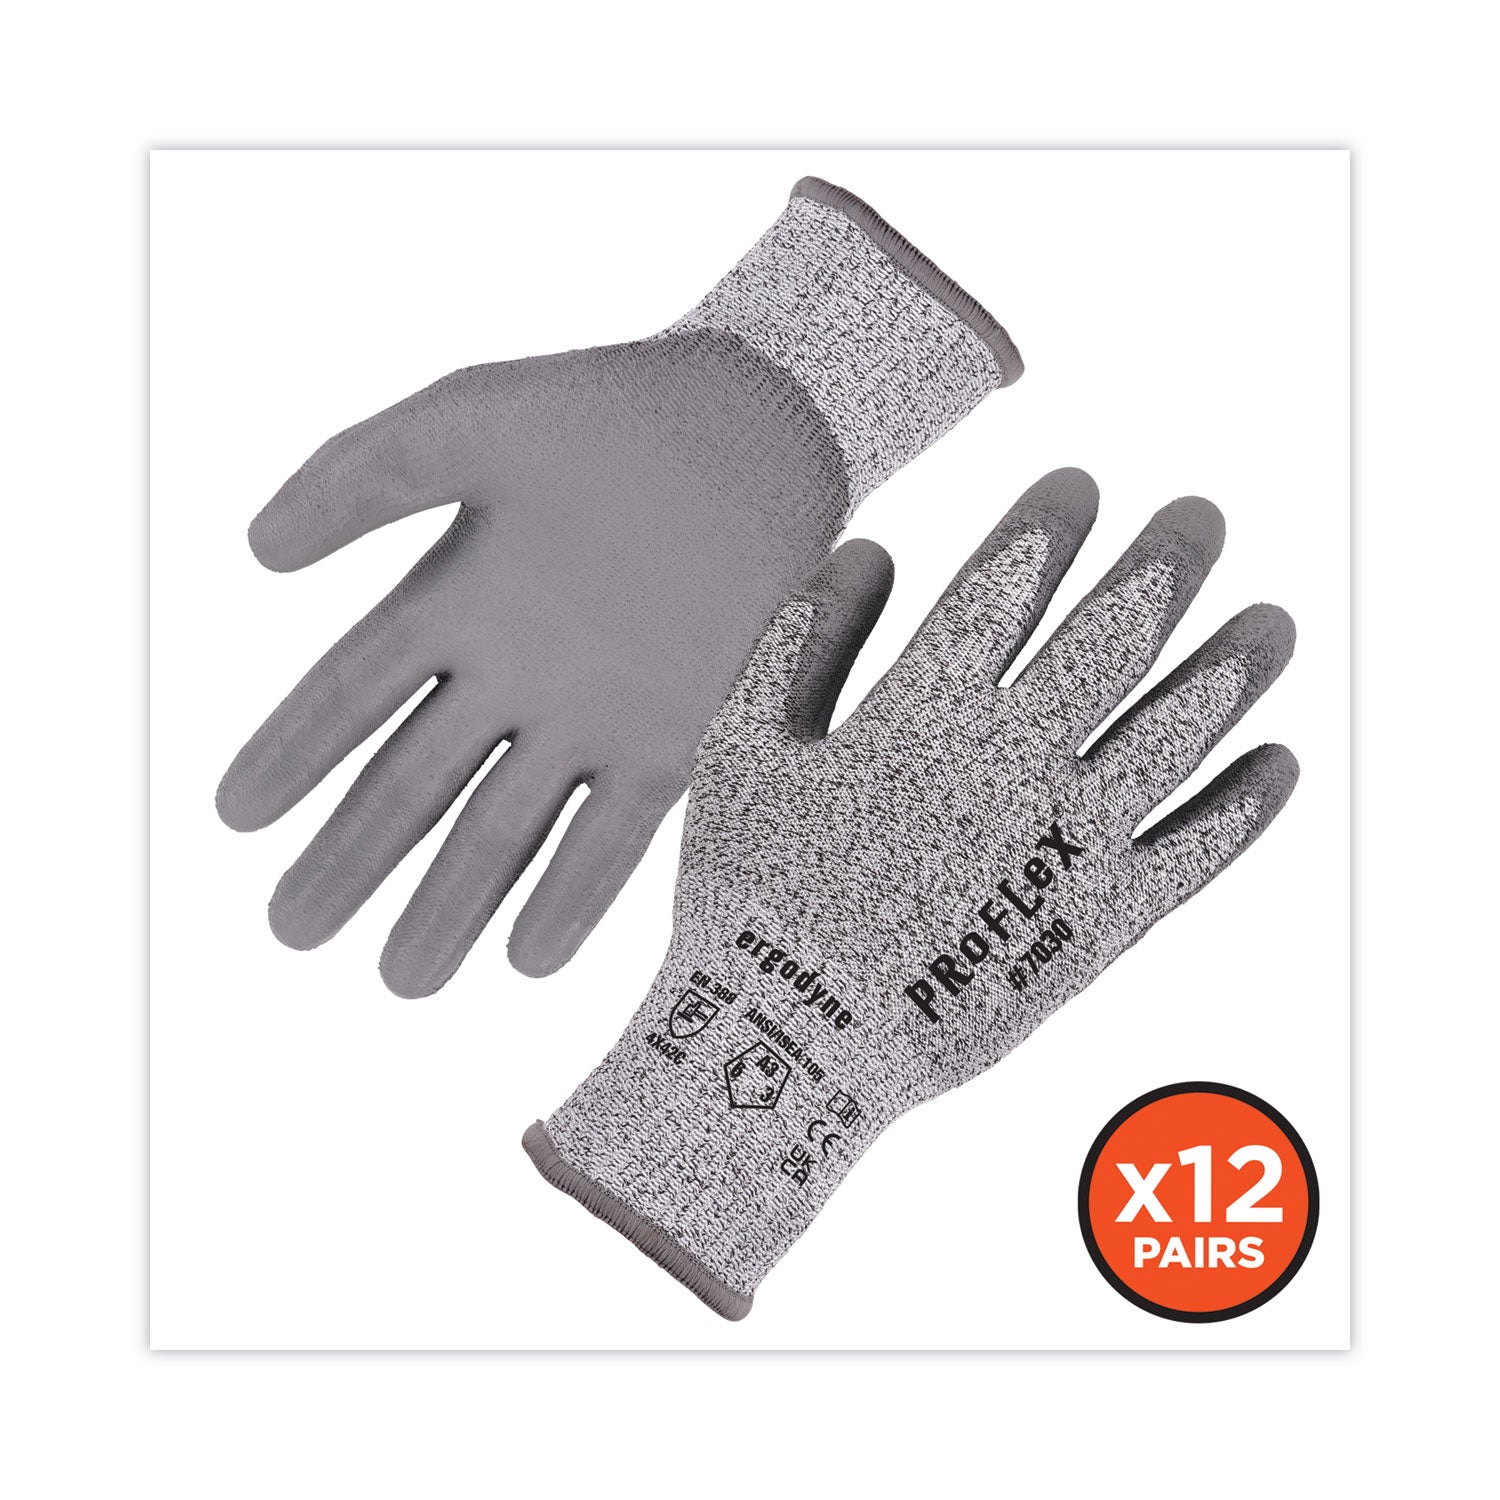 proflex-7030-ansi-a3-pu-coated-cr-gloves-gray-large-12-pairs-pack-ships-in-1-3-business-days_ego10454 - 2